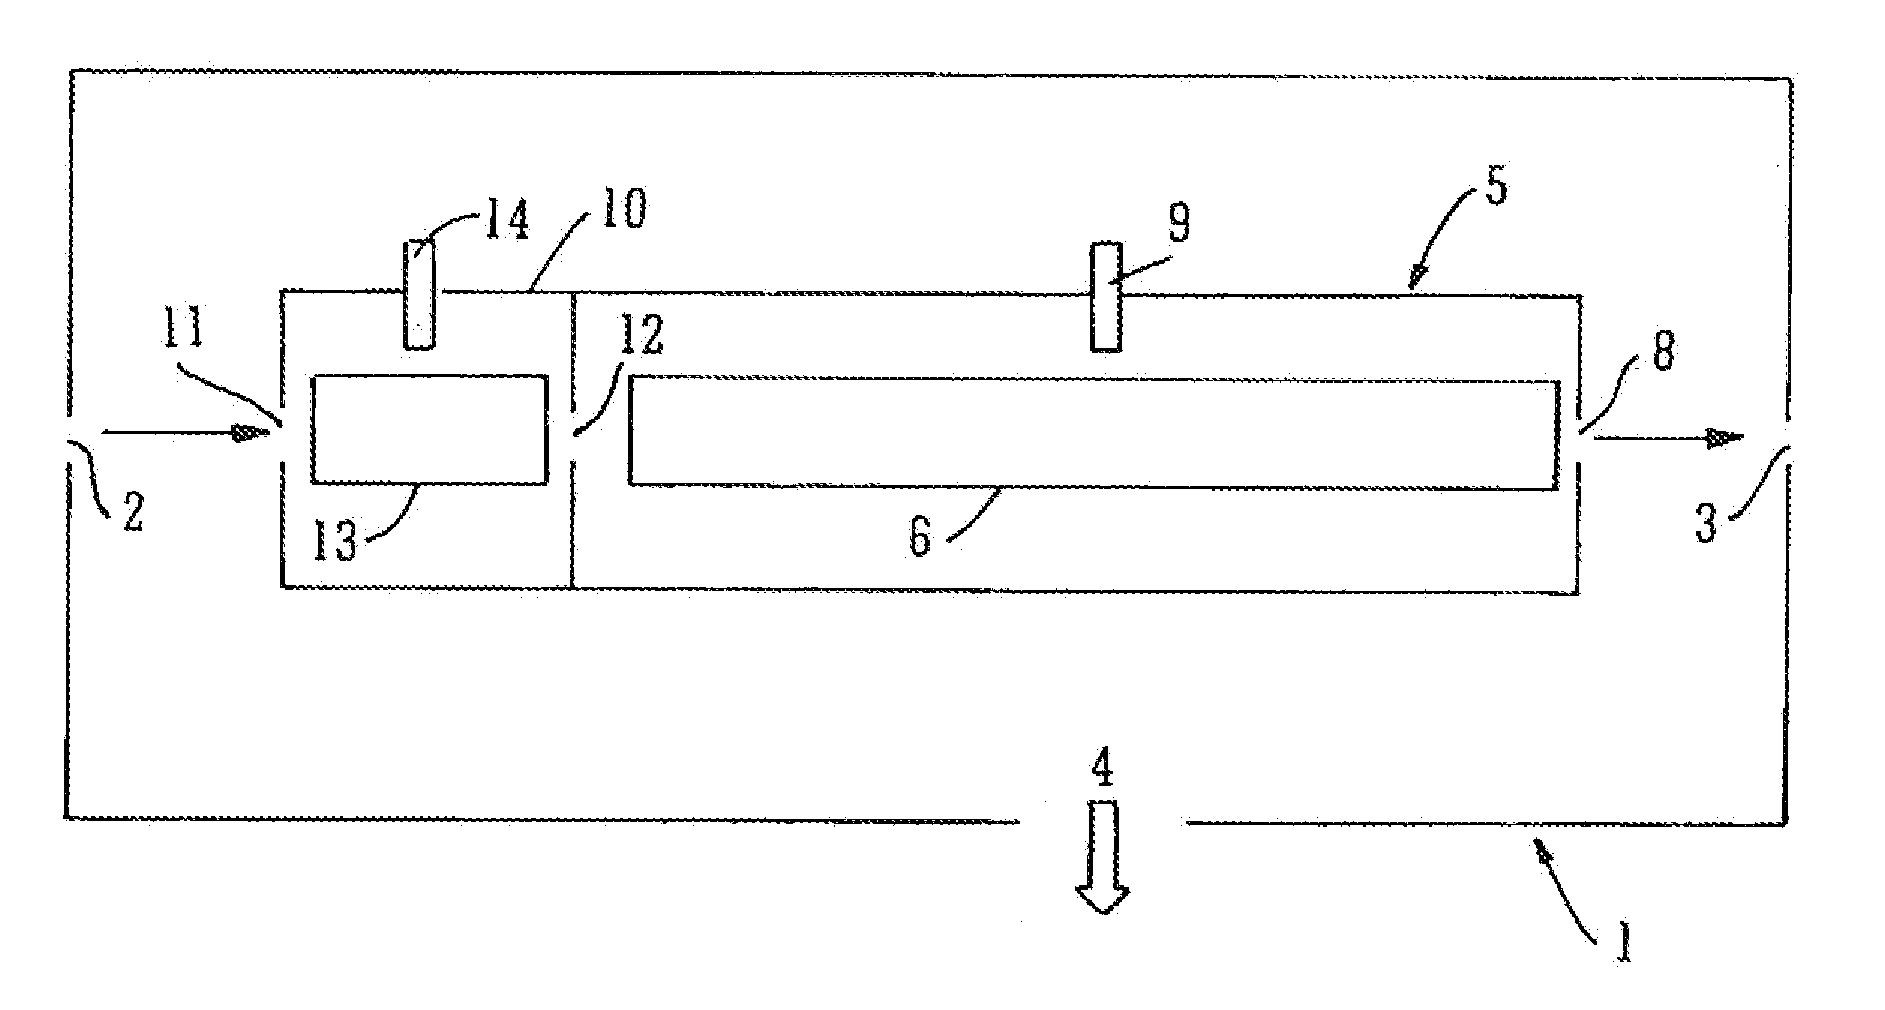 Apparatus Comprising an Ion Mobility Spectrometer